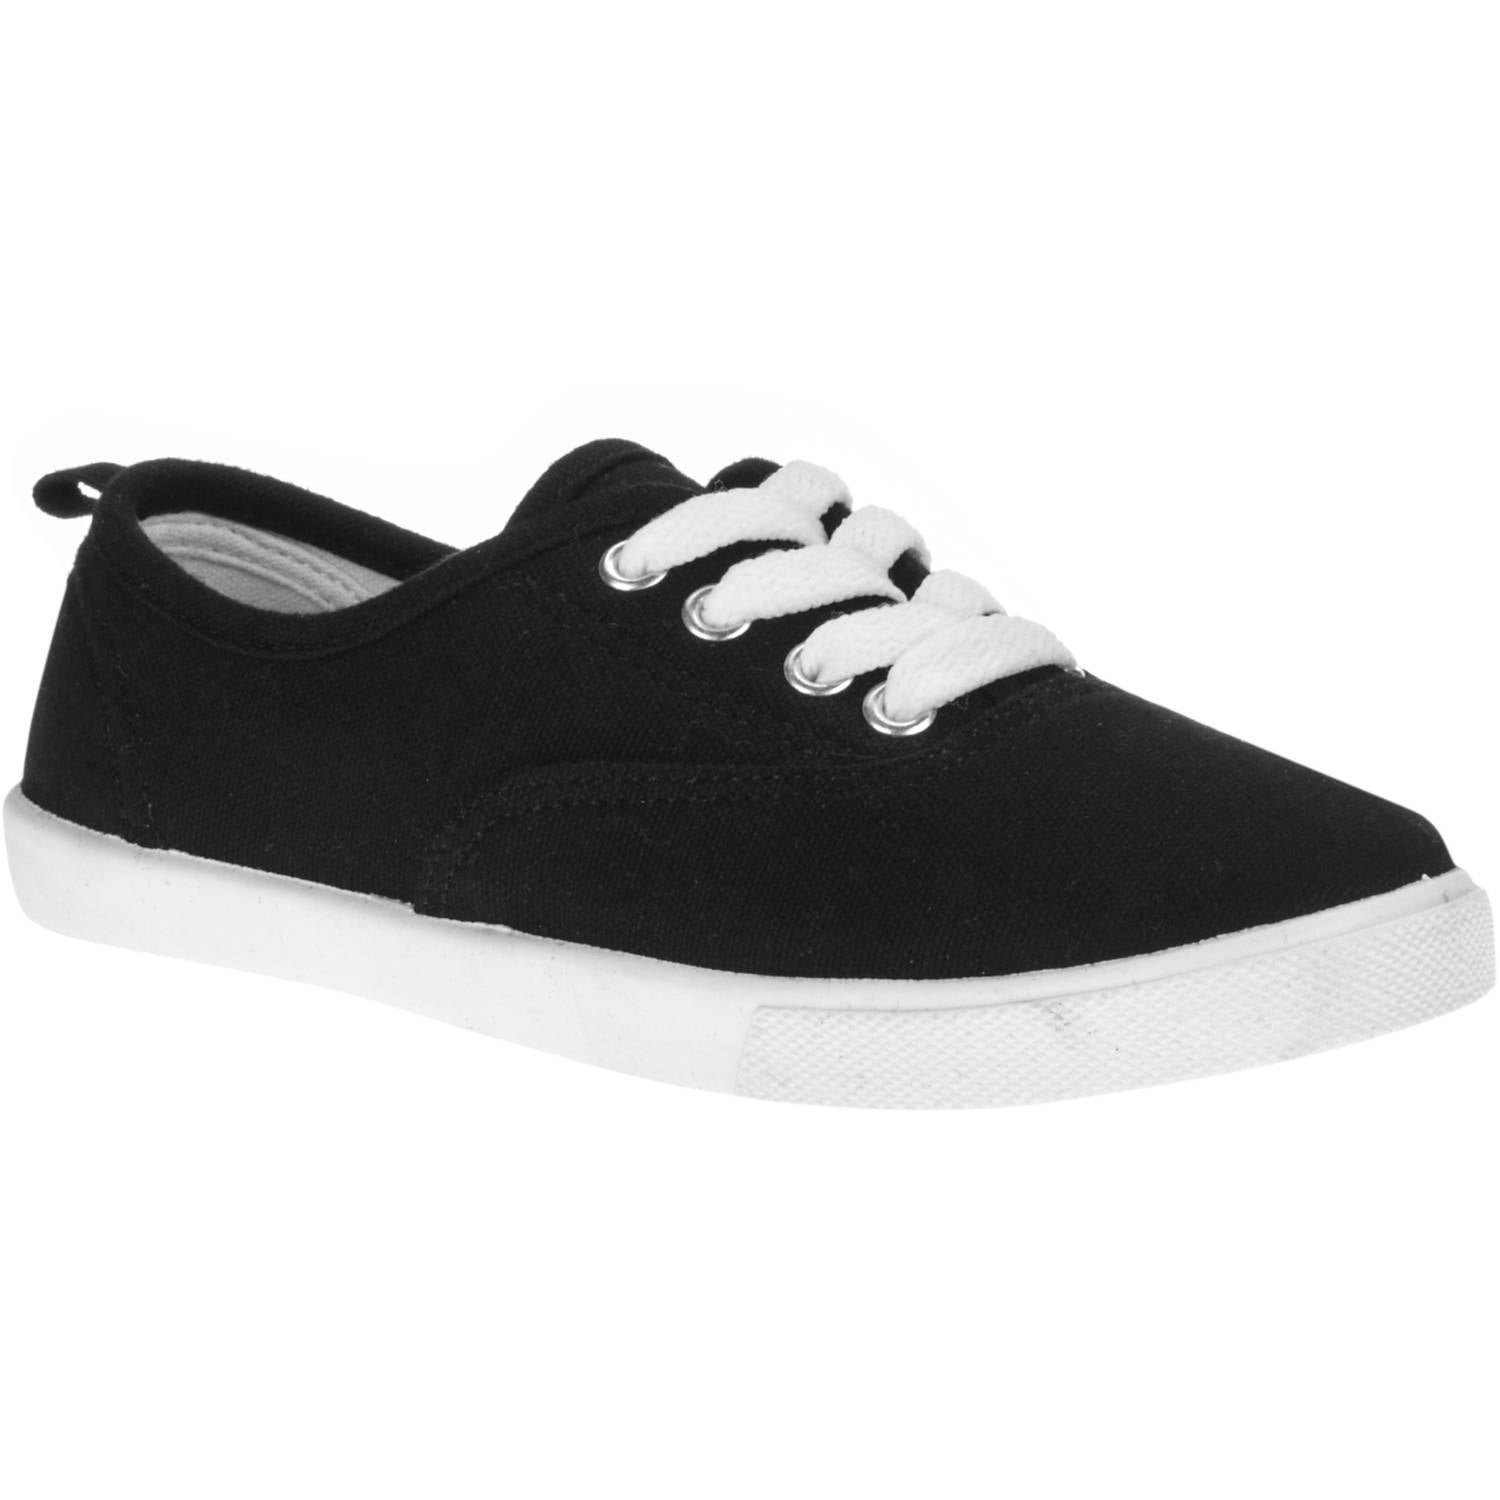 New Boys Girls Youth Classic Low Top Canvas Tennis Shoes Lace Up Sneakers Kids 